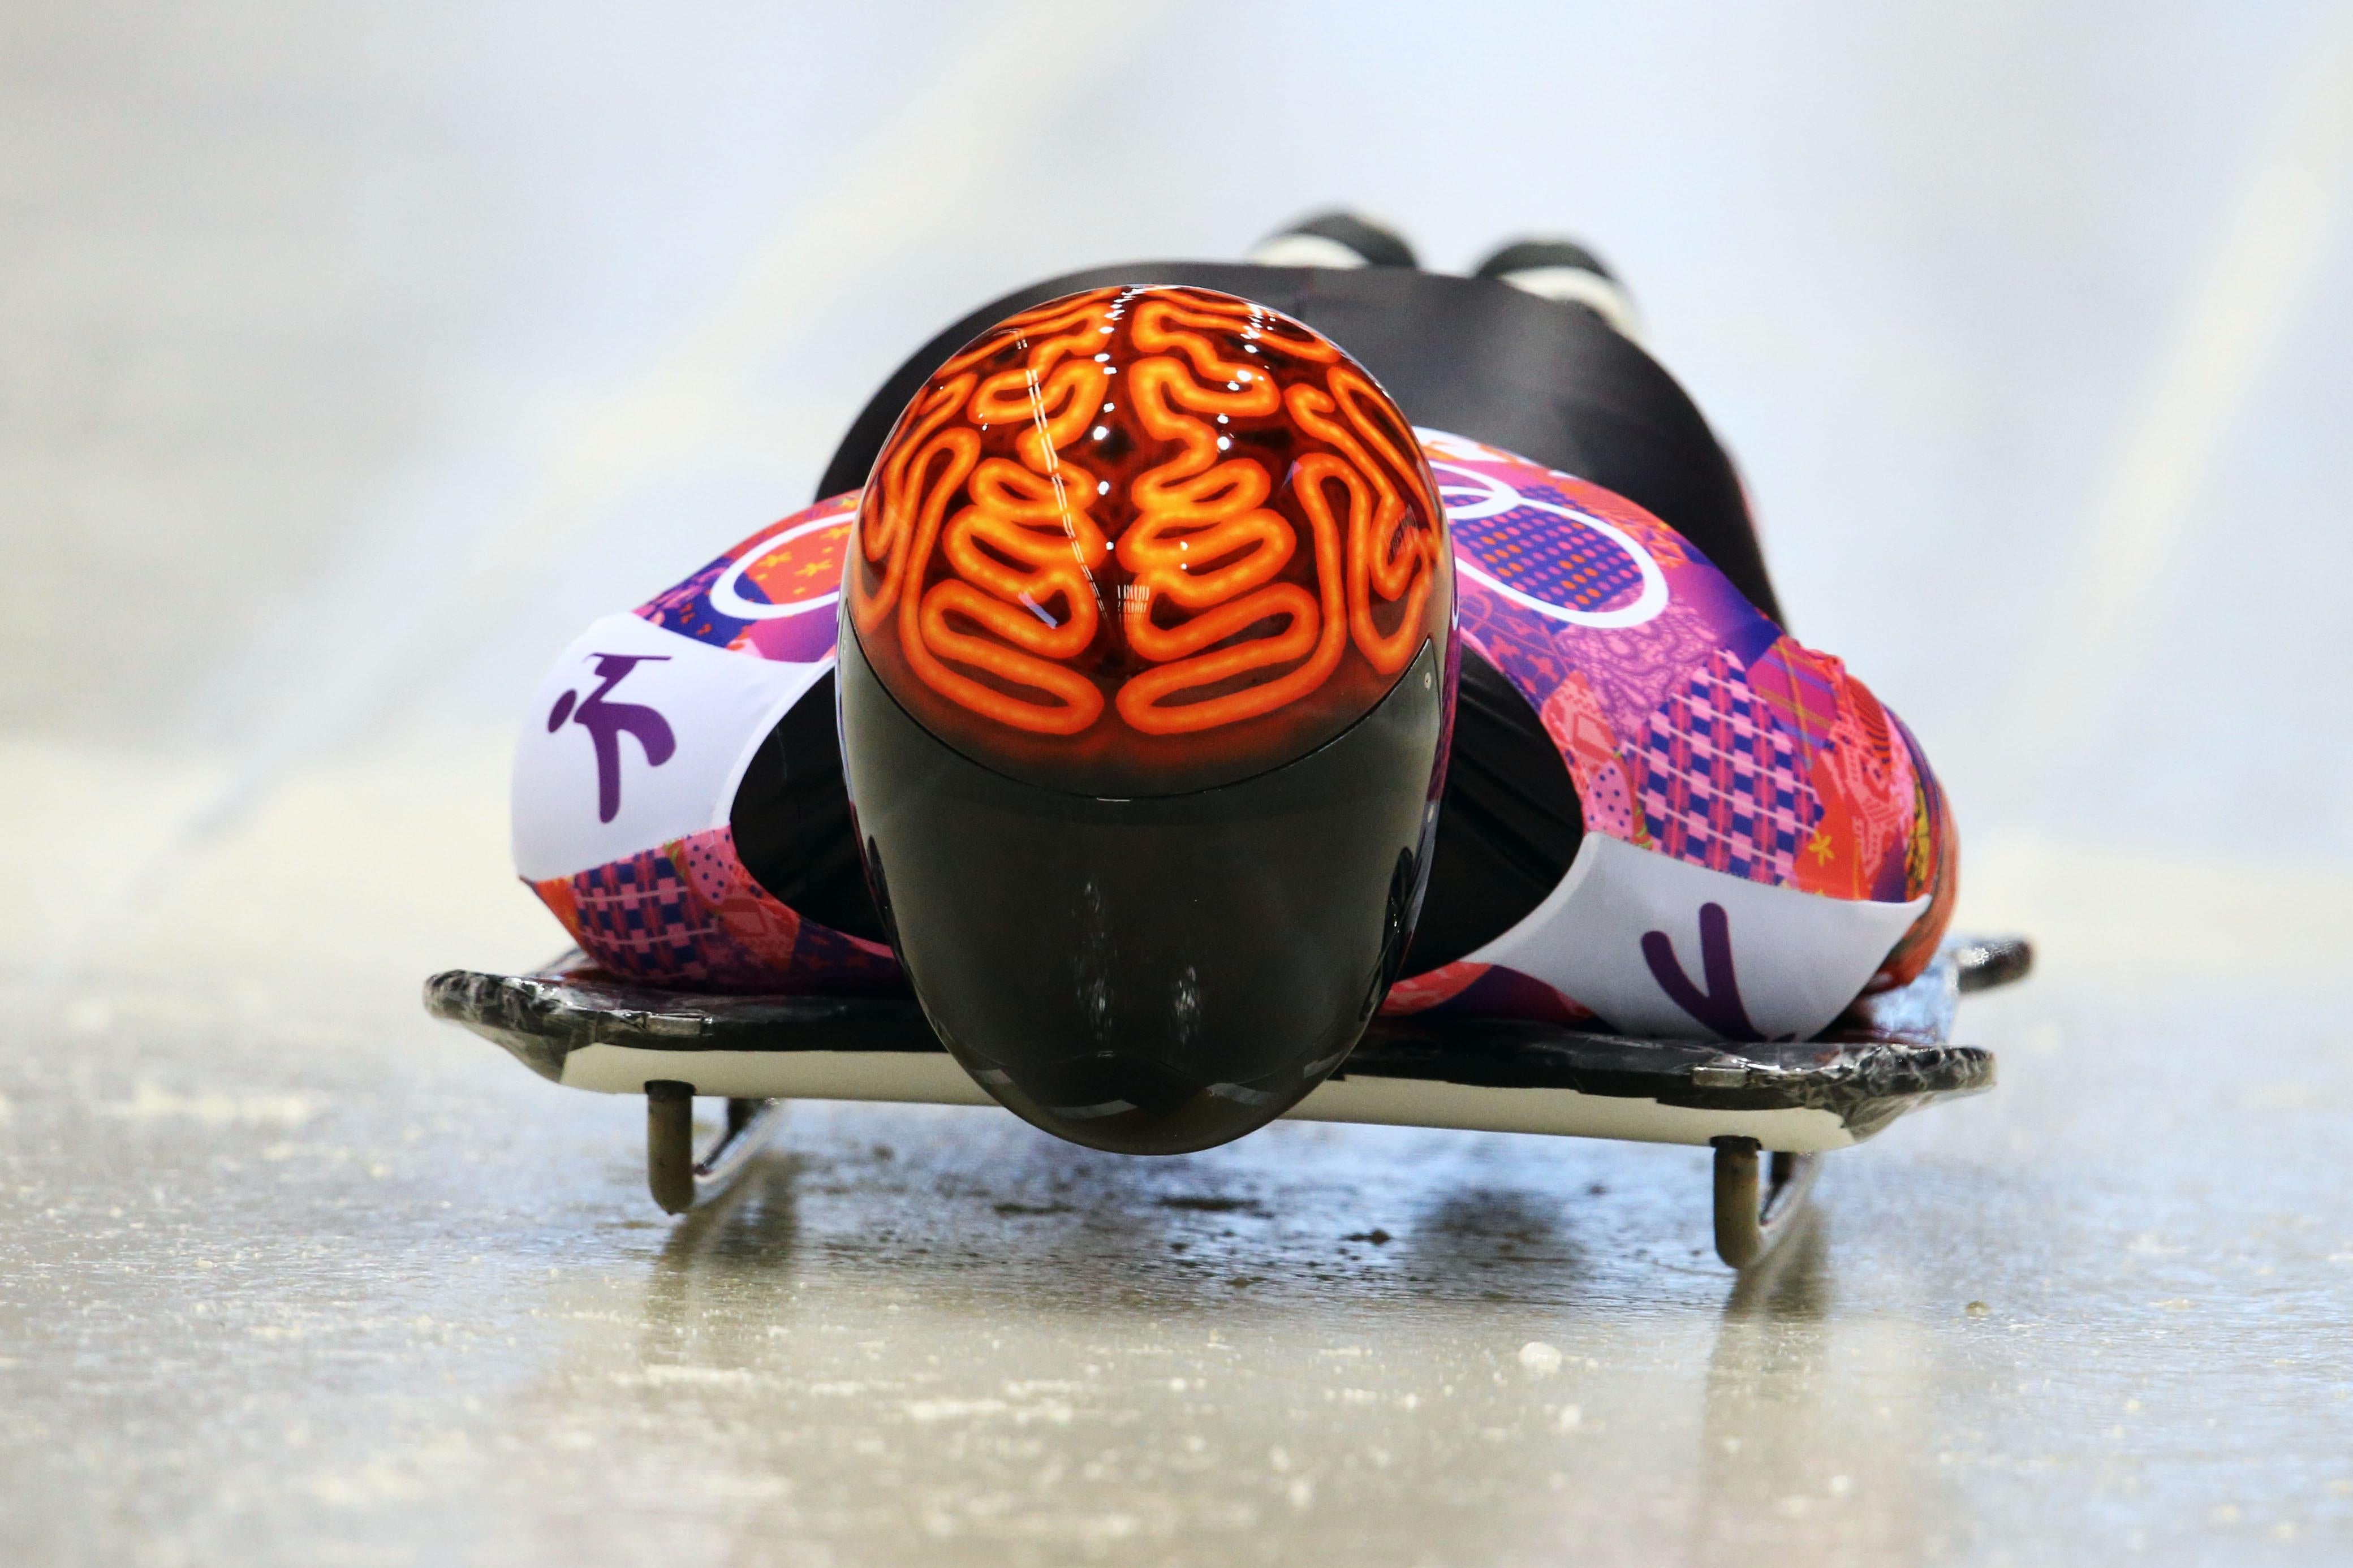 SOCHI, RUSSIA - FEBRUARY 14: John Fairbairn of Canada competes during the Men's Skeleton heats on Day 7 of the Sochi 2014 Winter Olympics at Sliding Center Sanki on February 14, 2014 in Sochi, Russia.  (Photo by Al Bello/Getty Images)